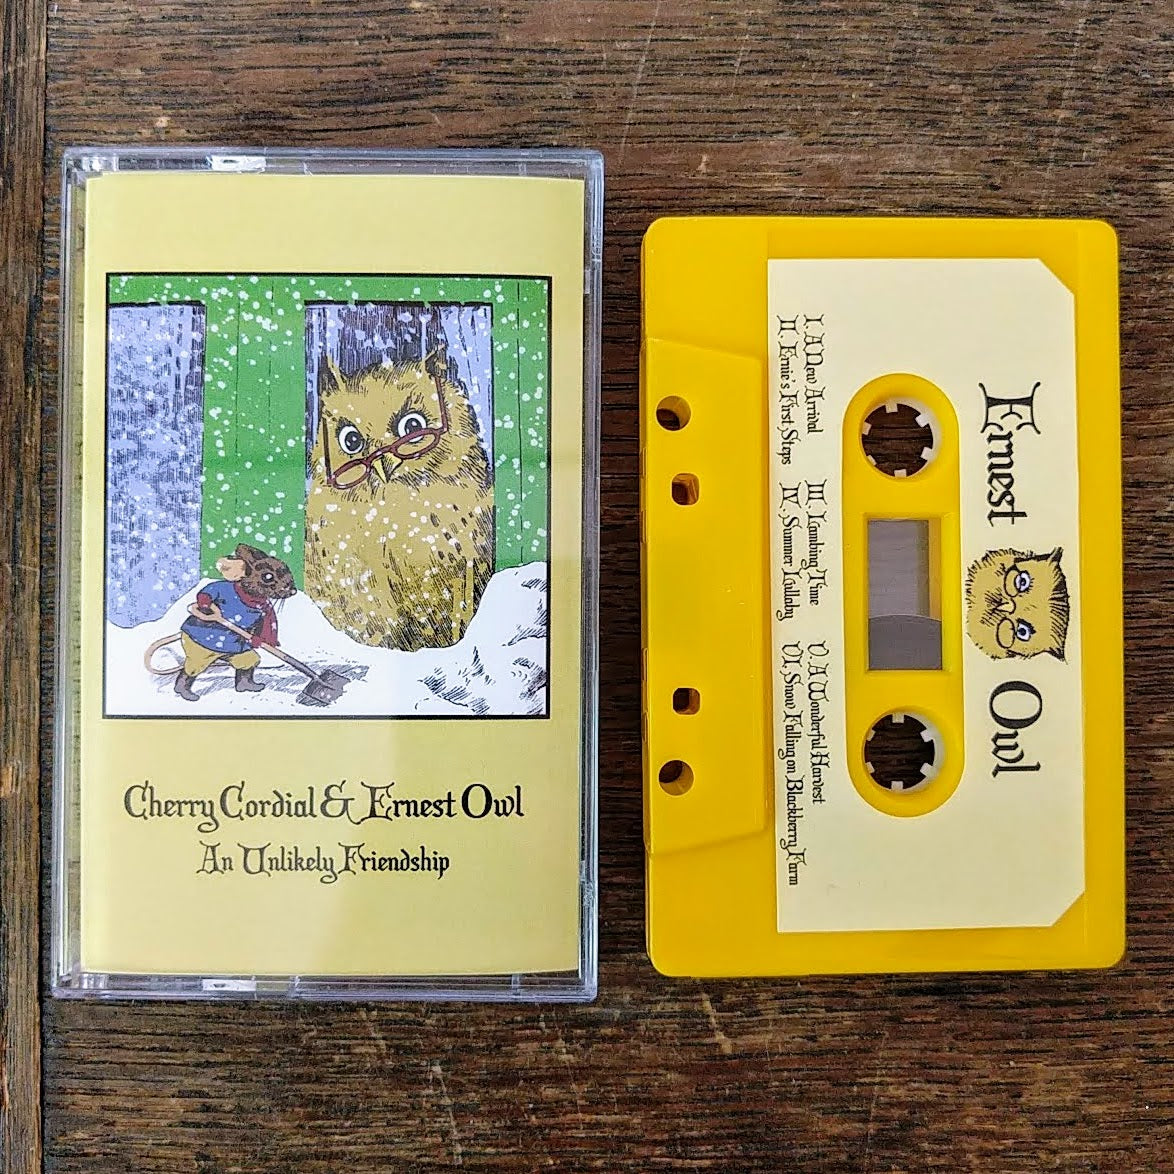 [SOLD OUT] CHERRY CORDIAL / ERNEST OWL Split Cassette Tape